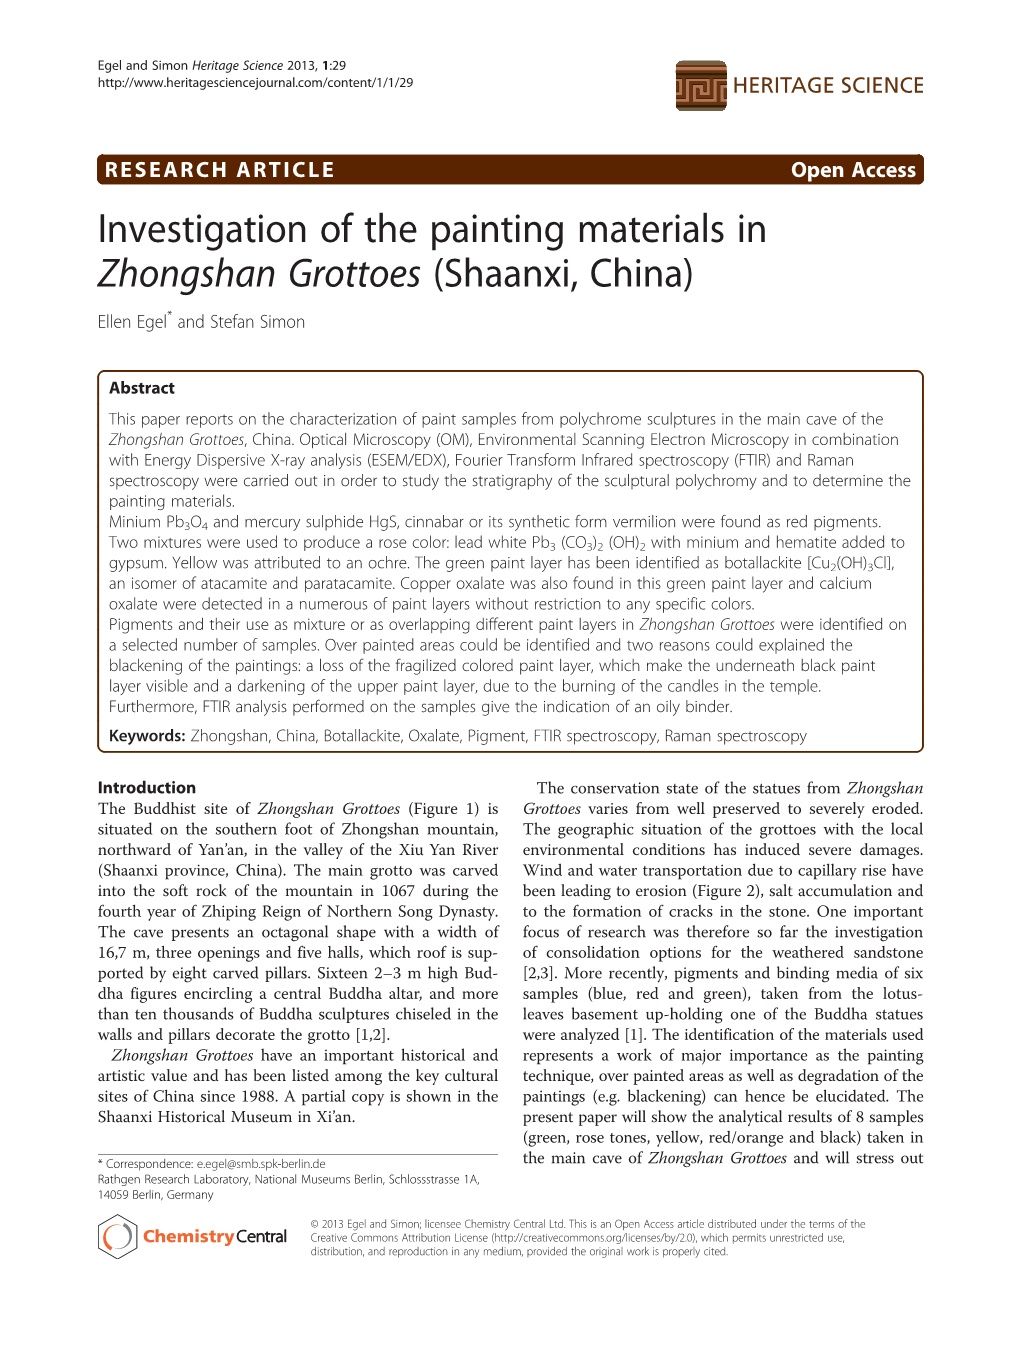 Investigation of the Painting Materials in Zhongshan Grottoes (Shaanxi, China) Ellen Egel* and Stefan Simon